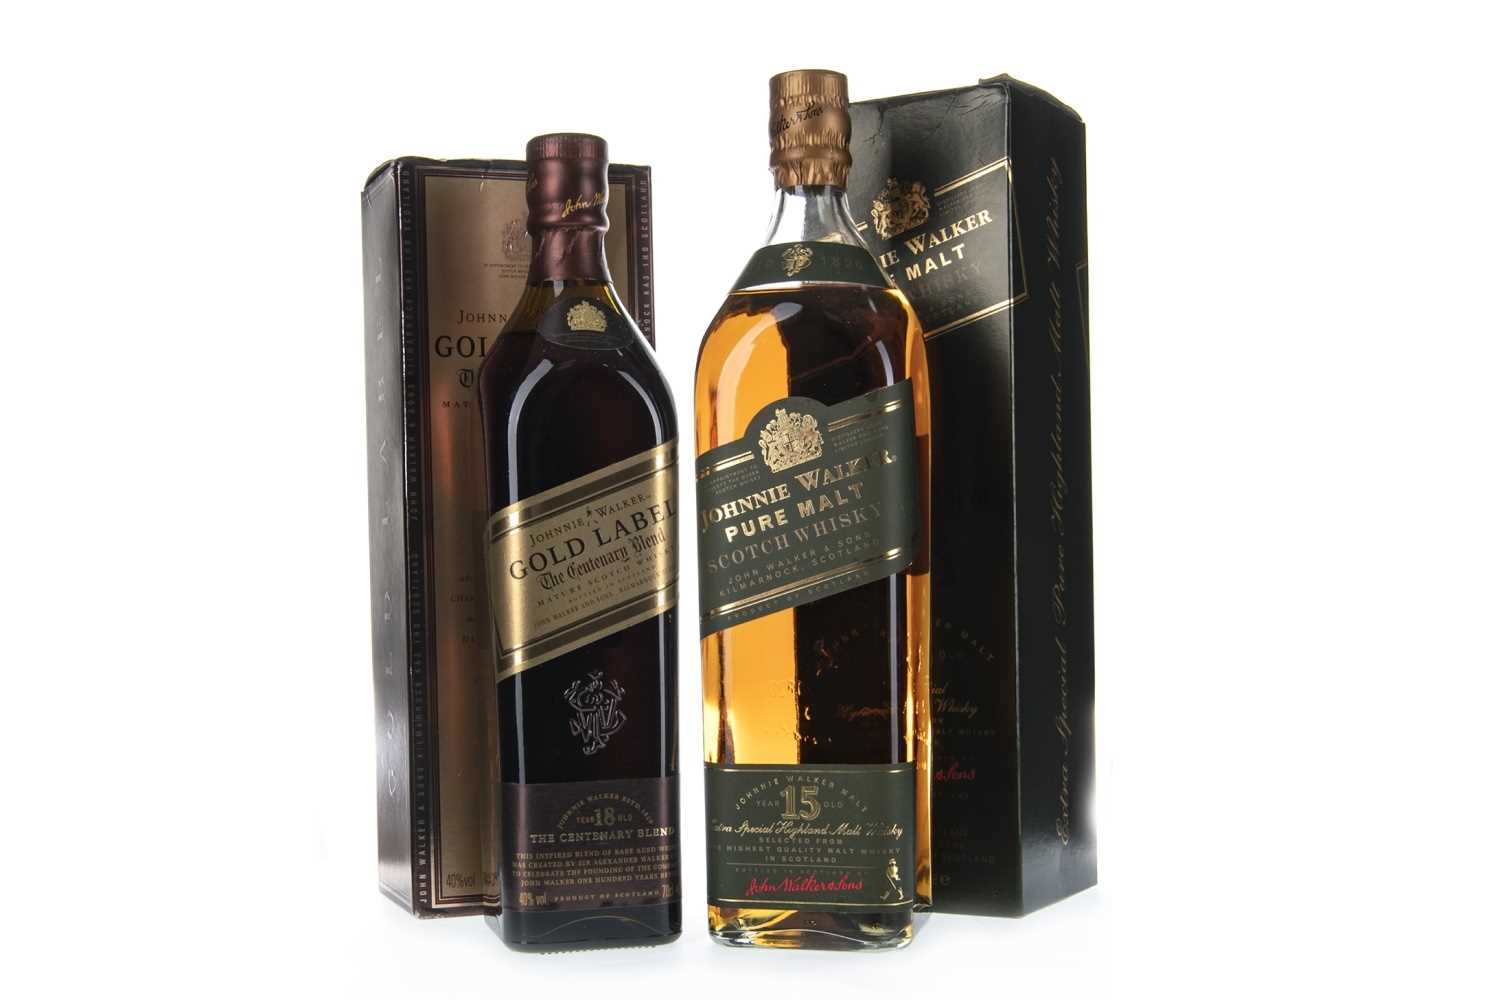 Lot 424 - JOHNNIE WALKER PURE MALT AGED 15 YEARS ONE LITRE, AND GOLD LABEL AGED 18 YEARS